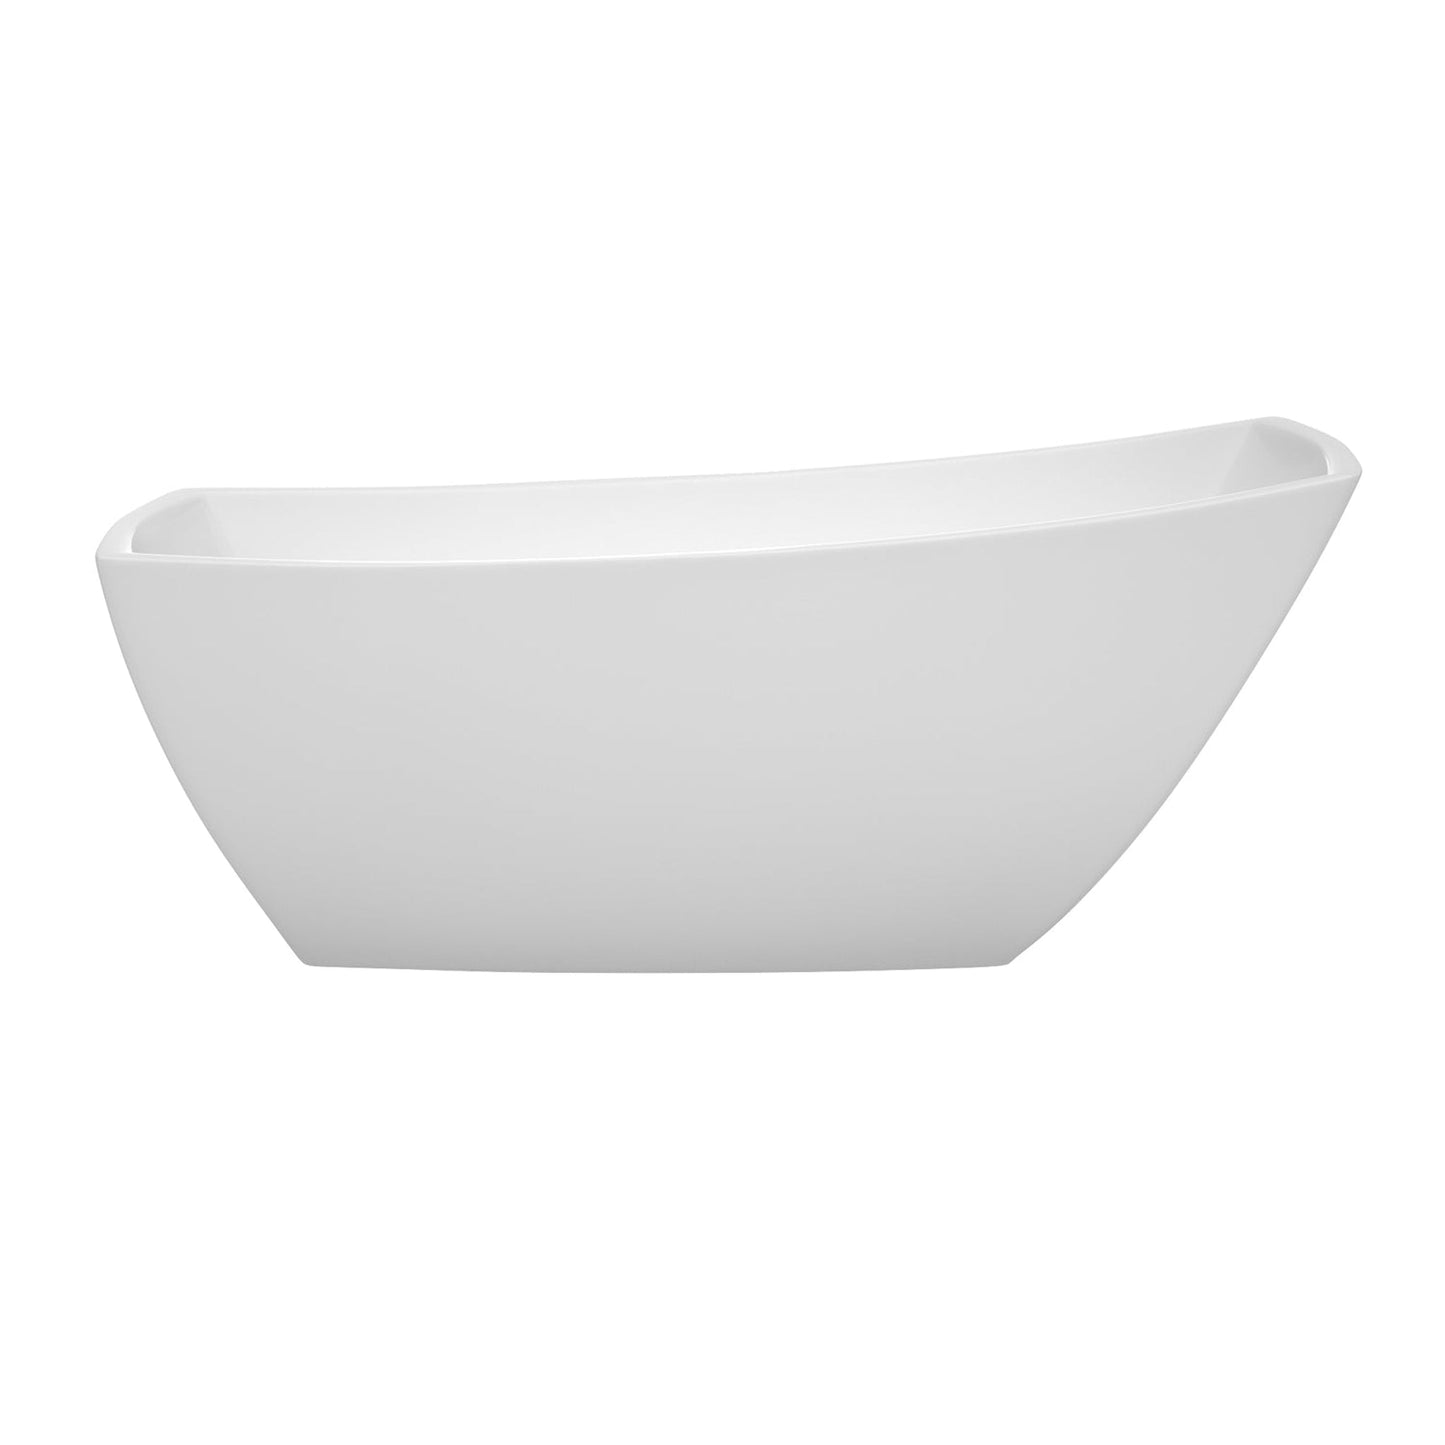 Wyndham Collection Antigua 67" Freestanding Bathtub in White With Polished Chrome Drain and Overflow Trim